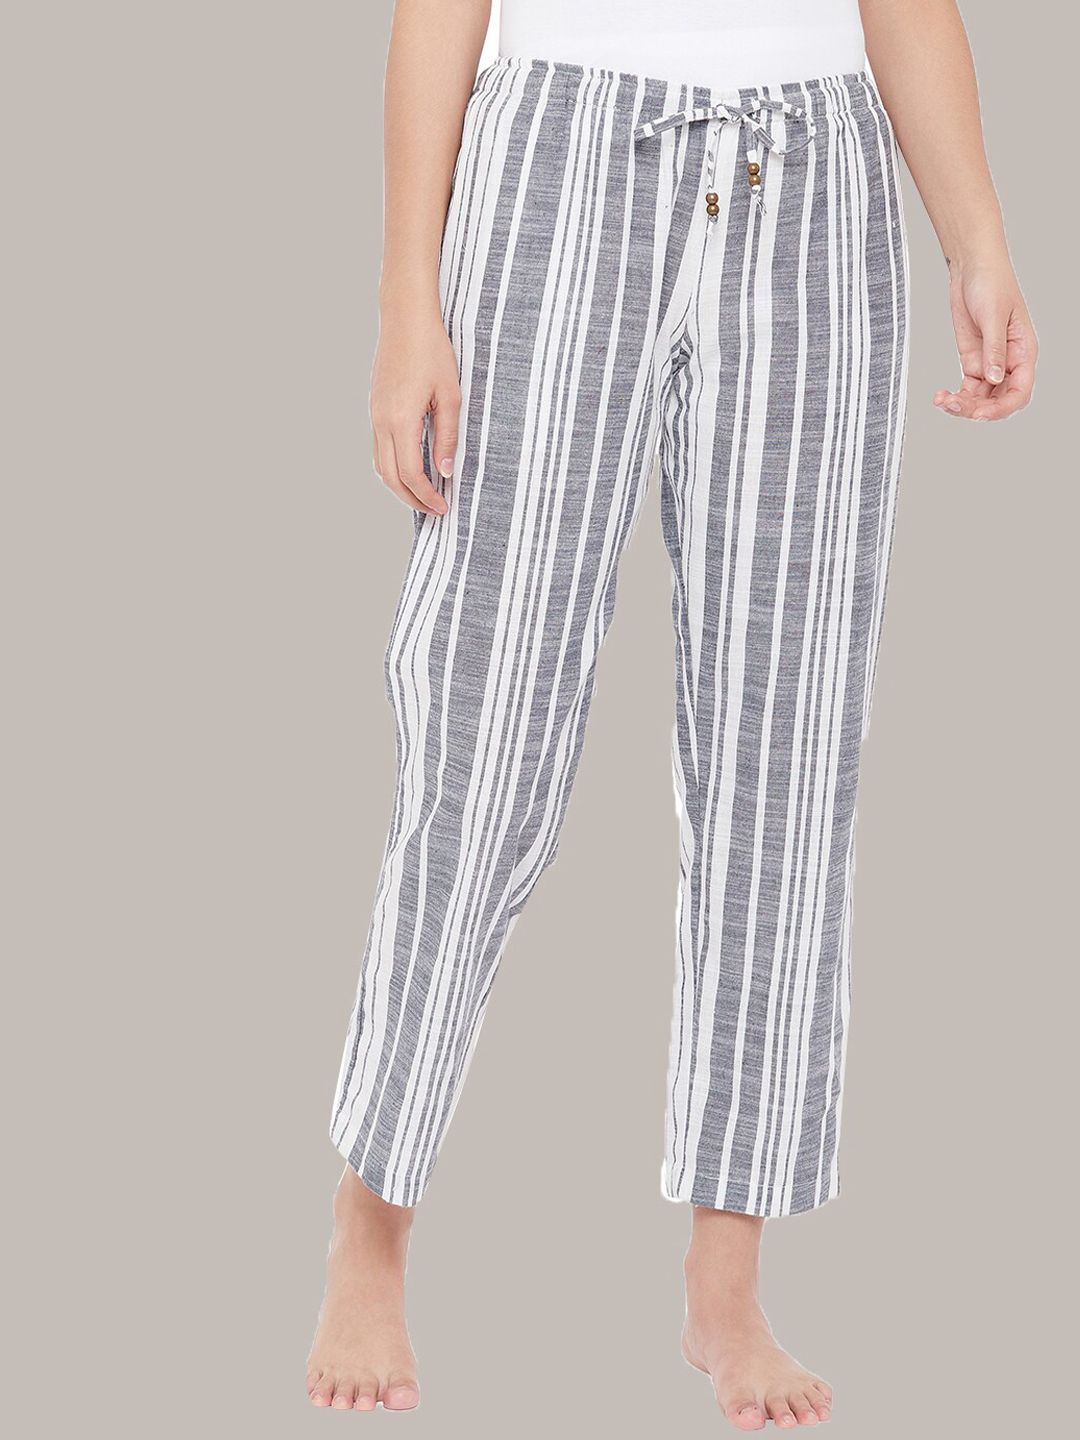 Style Shoes Women's Grey & White Striped Cotton Lounge Pants Price in India